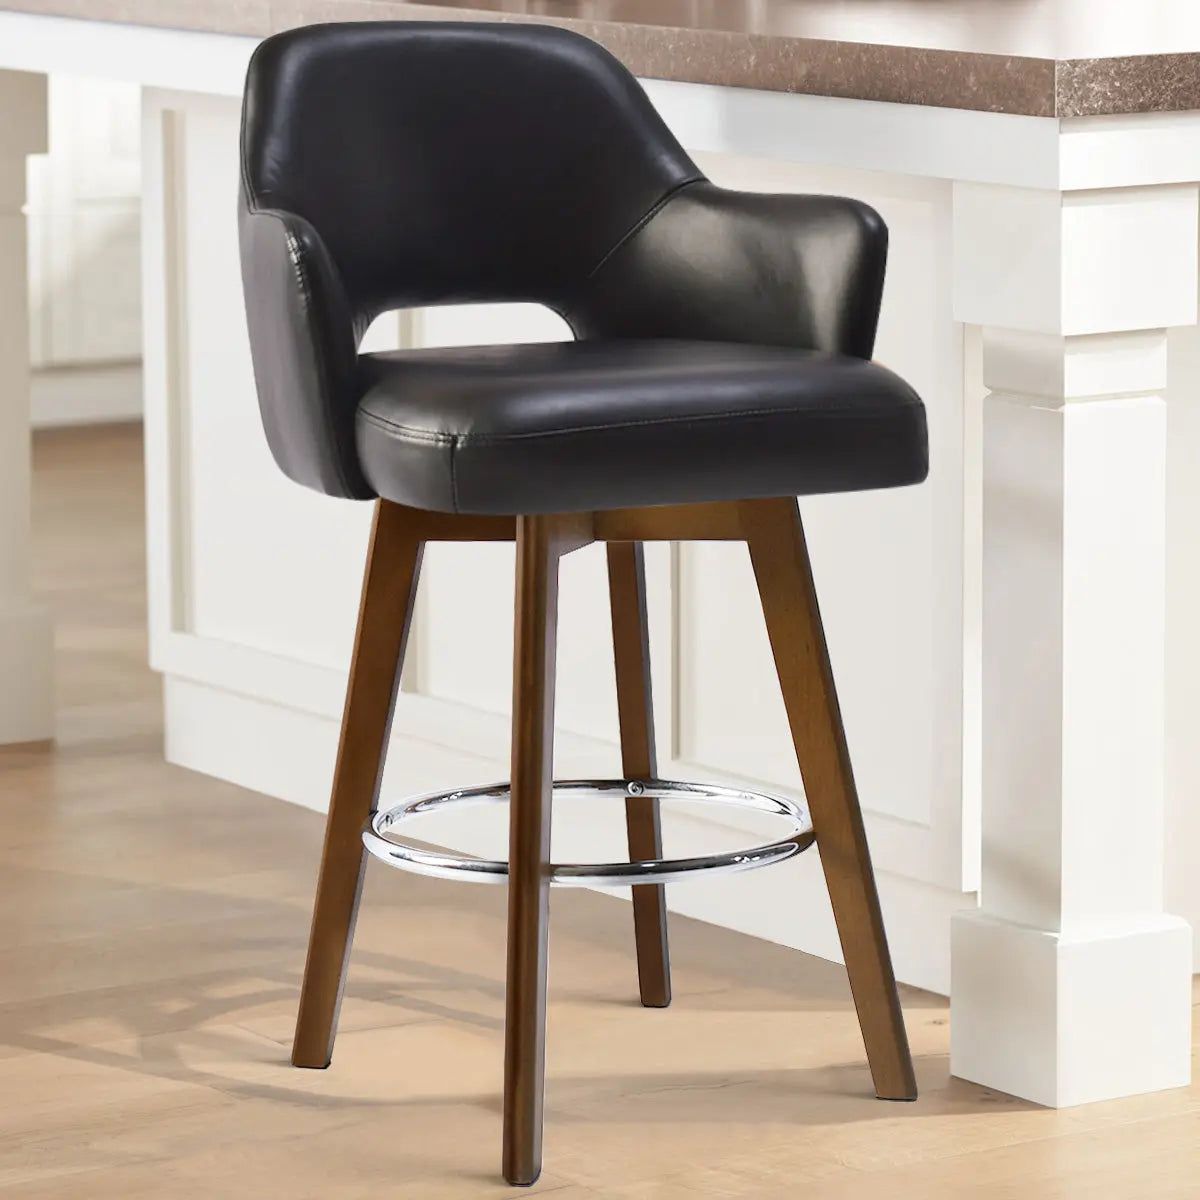 Elegant and Comfortable Swivel Bar Stools for Your Home